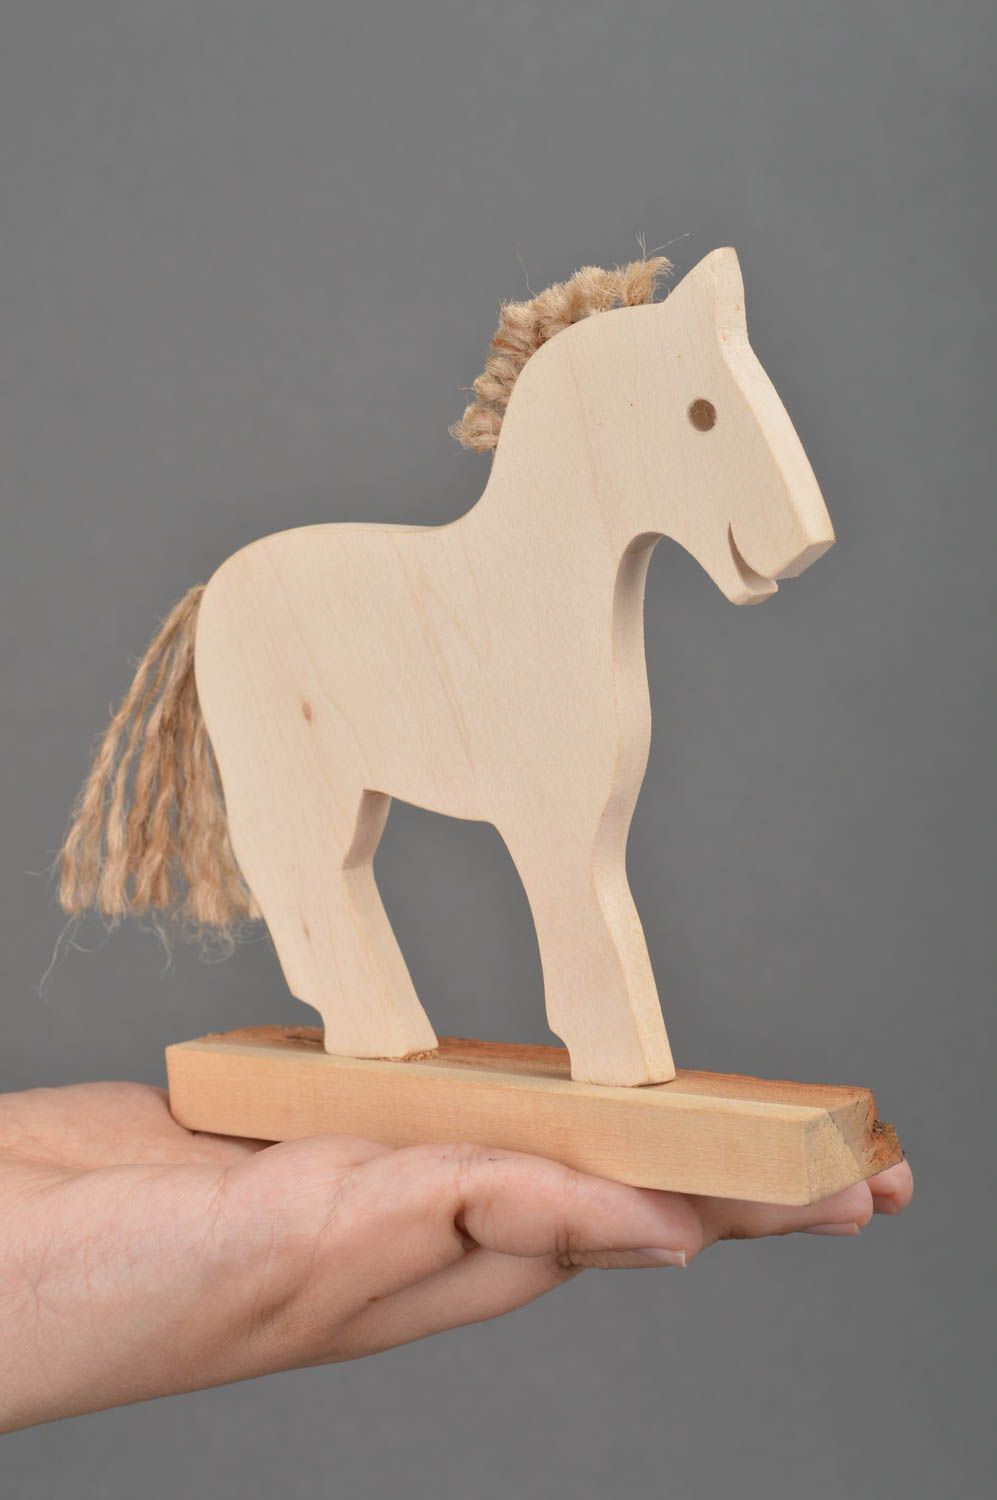 Handmade unusual cute toy horse made of wood for kids for interior decor photo 5